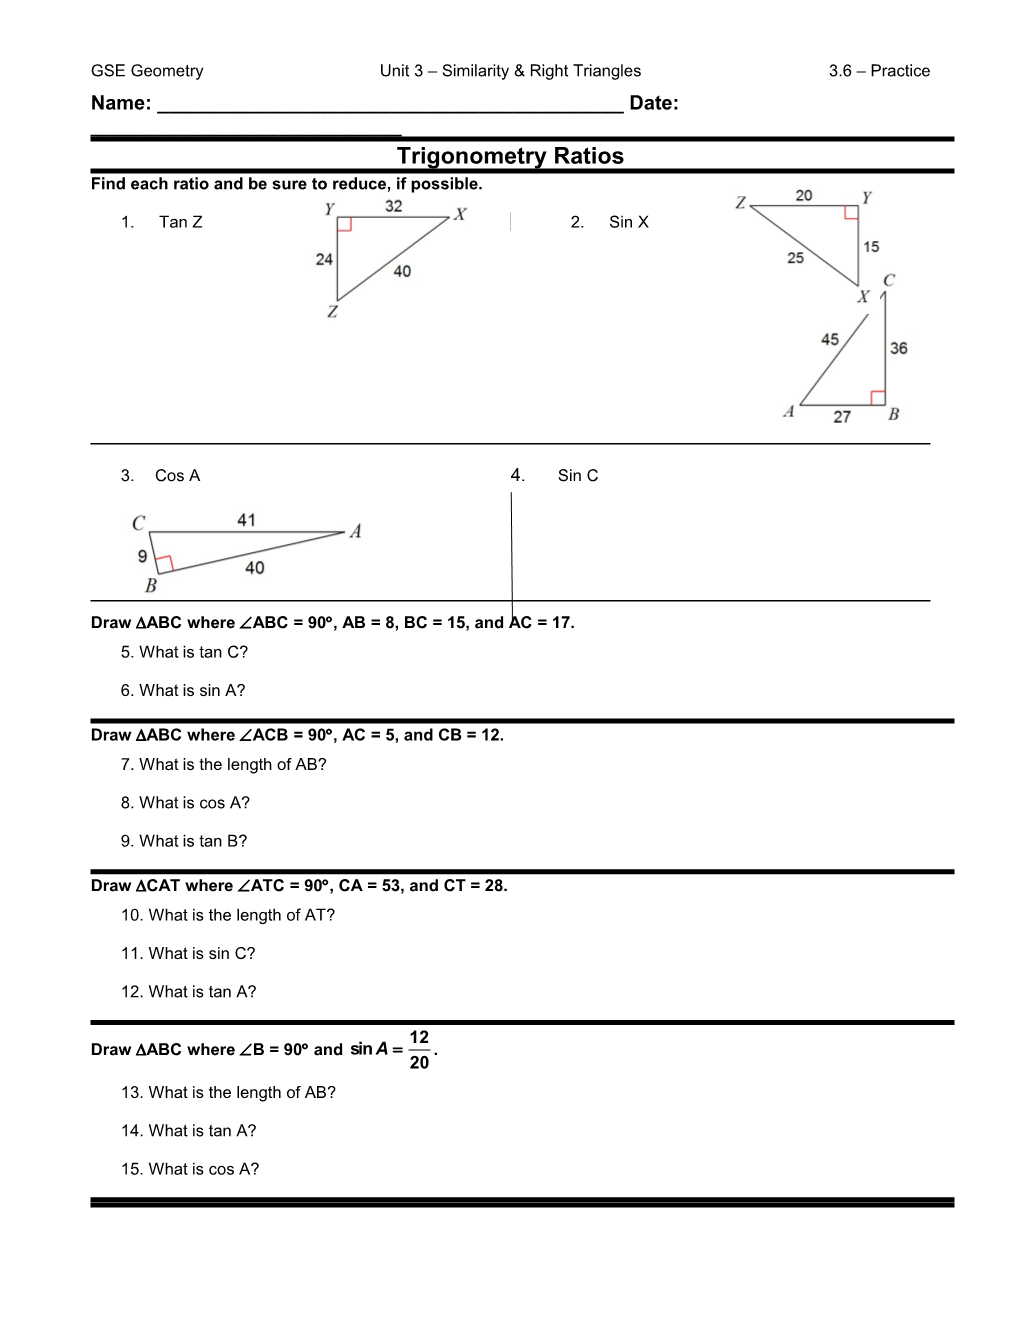 GSE Geometry Unit 3 Similarity & Right Triangles 3.6 Practice